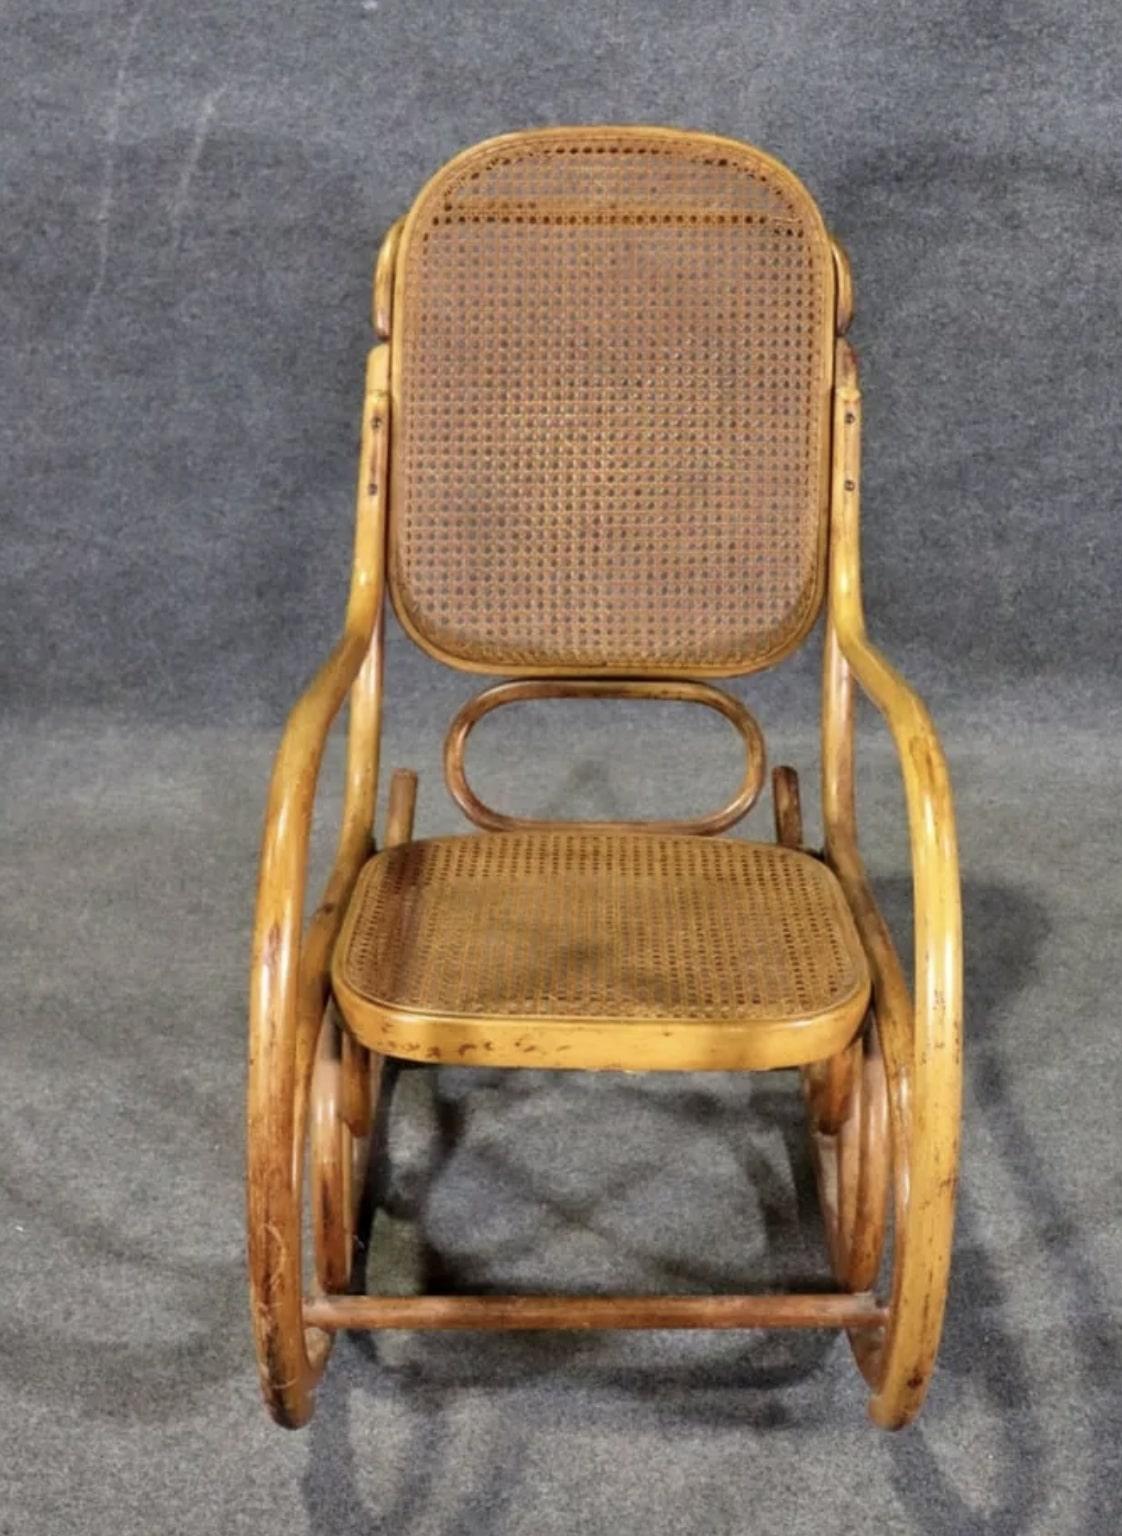 Classic rocking chair by Thonet for Stending Co. Beautiful bentwood lines throughout this rocking chair, completed with caning seat and back.
Please confirm location NY or NJ